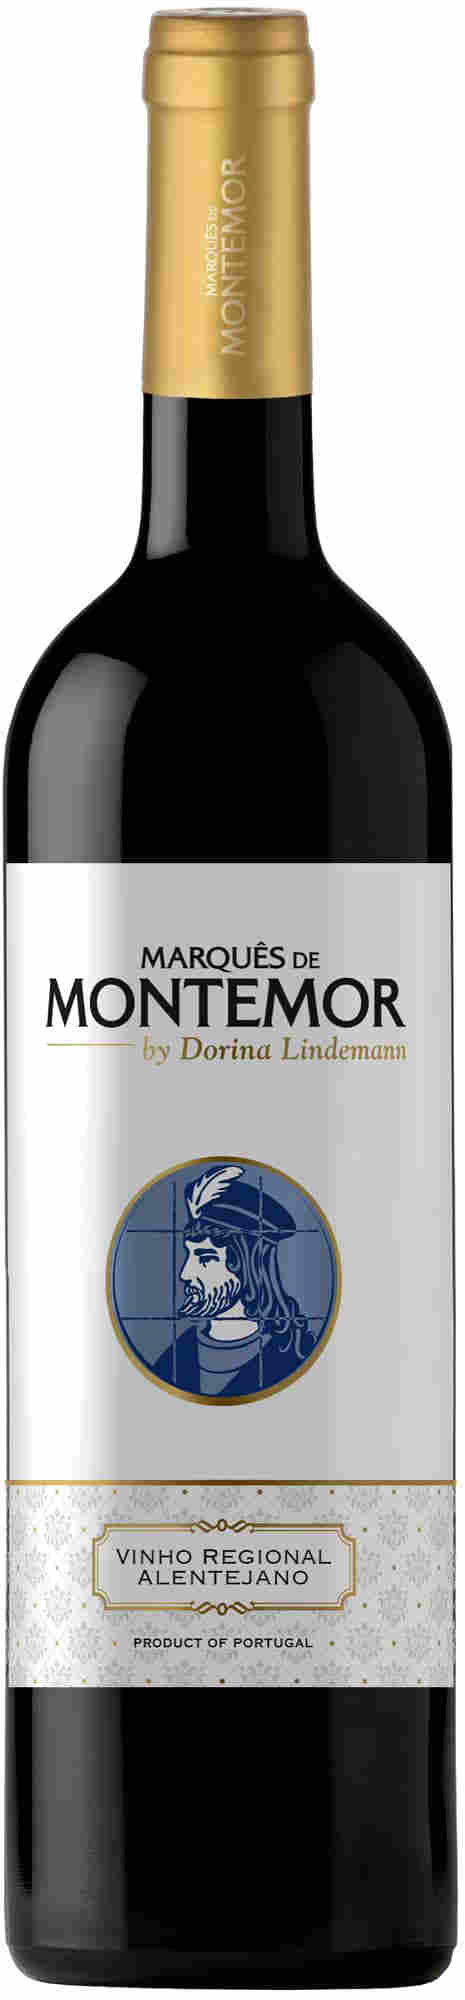 Marques de Montemor Alentejo Portugal dry red wine | Weingalerie - Wines  from PORTugal